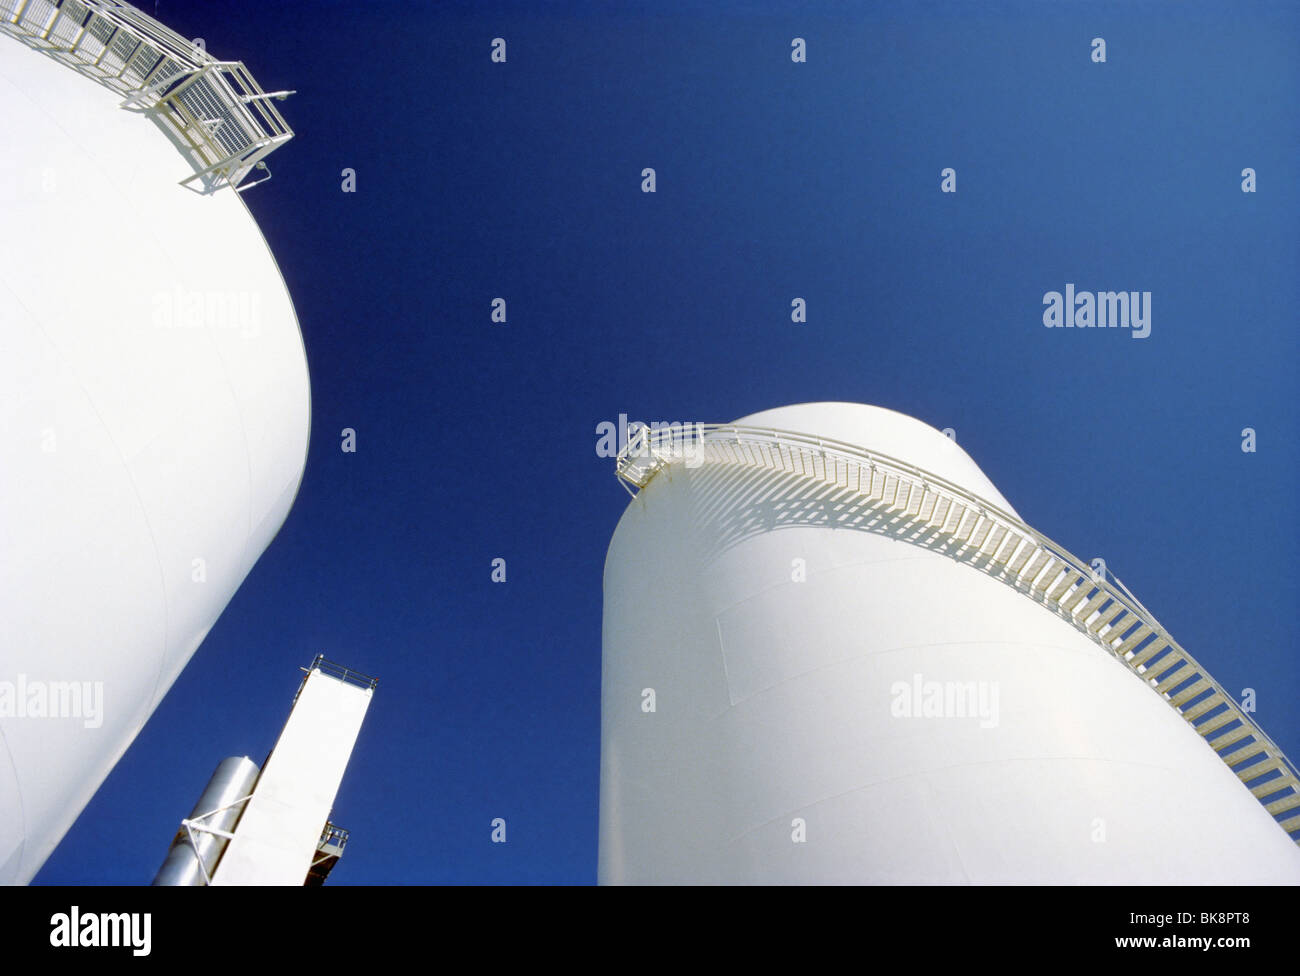 Large white metal storage tanks against a blue sky are used to store liquified gases. Stock Photo